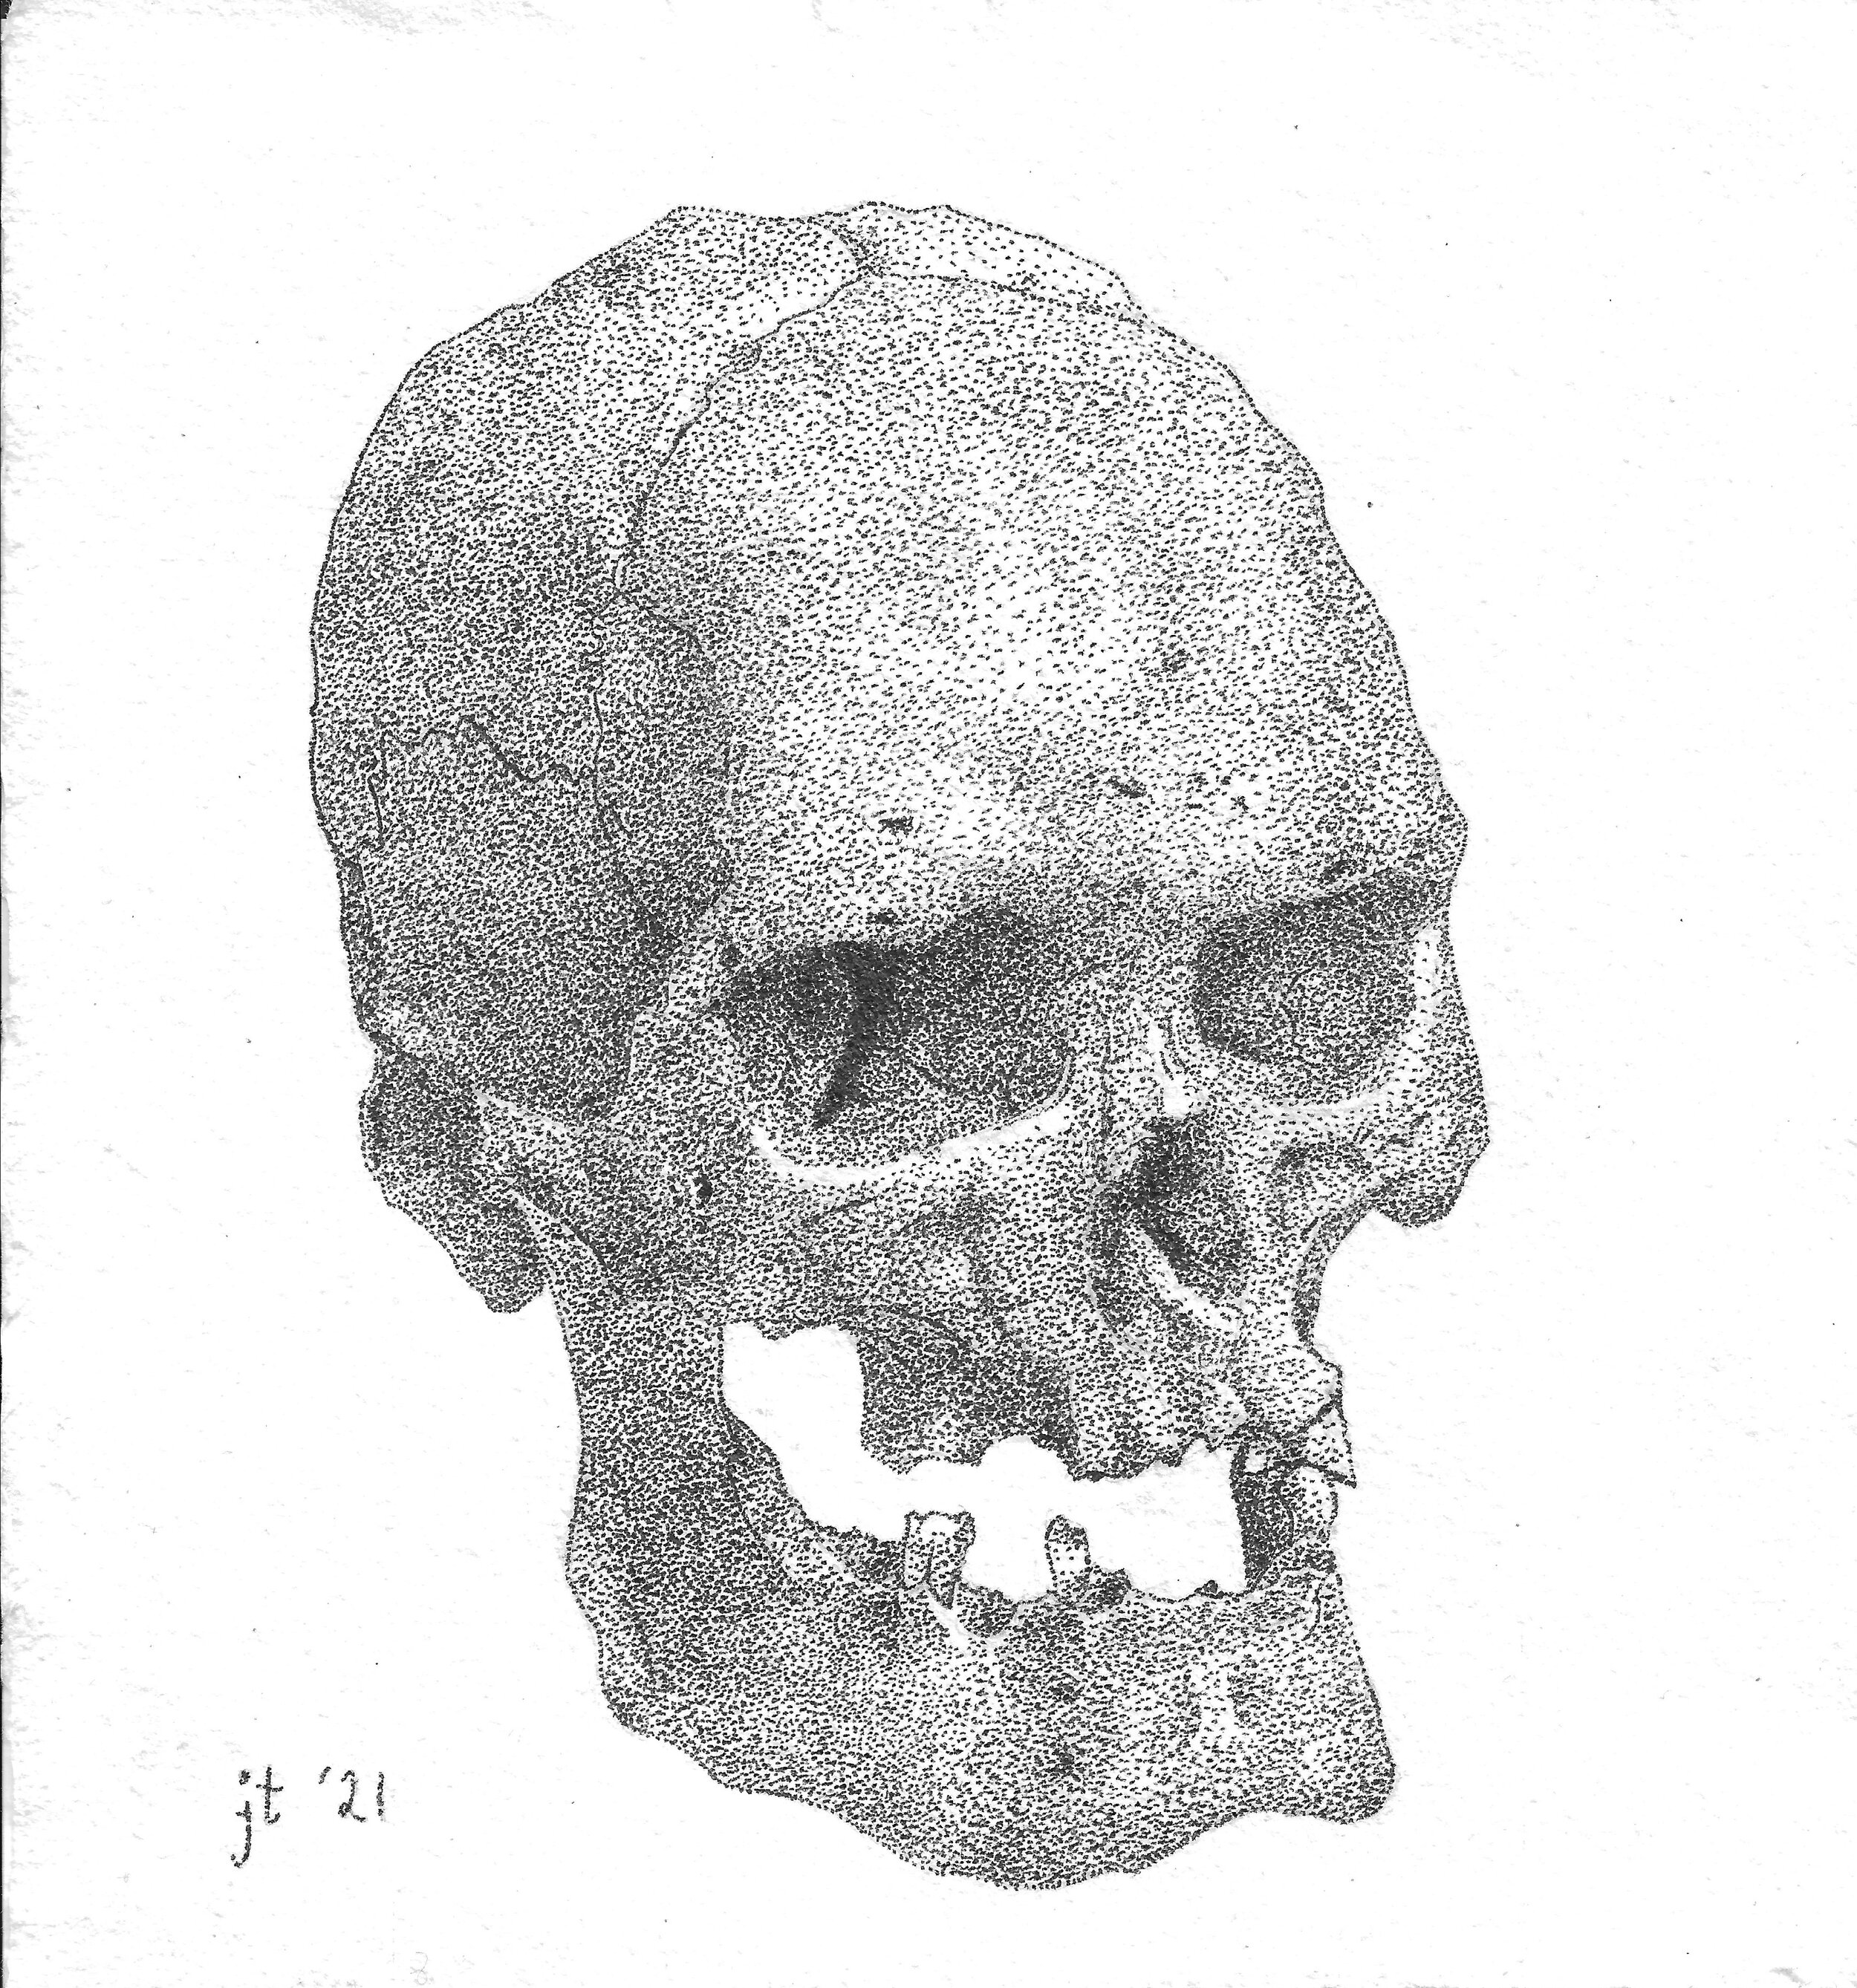 Human Male Skull (Acromegaly), 2021